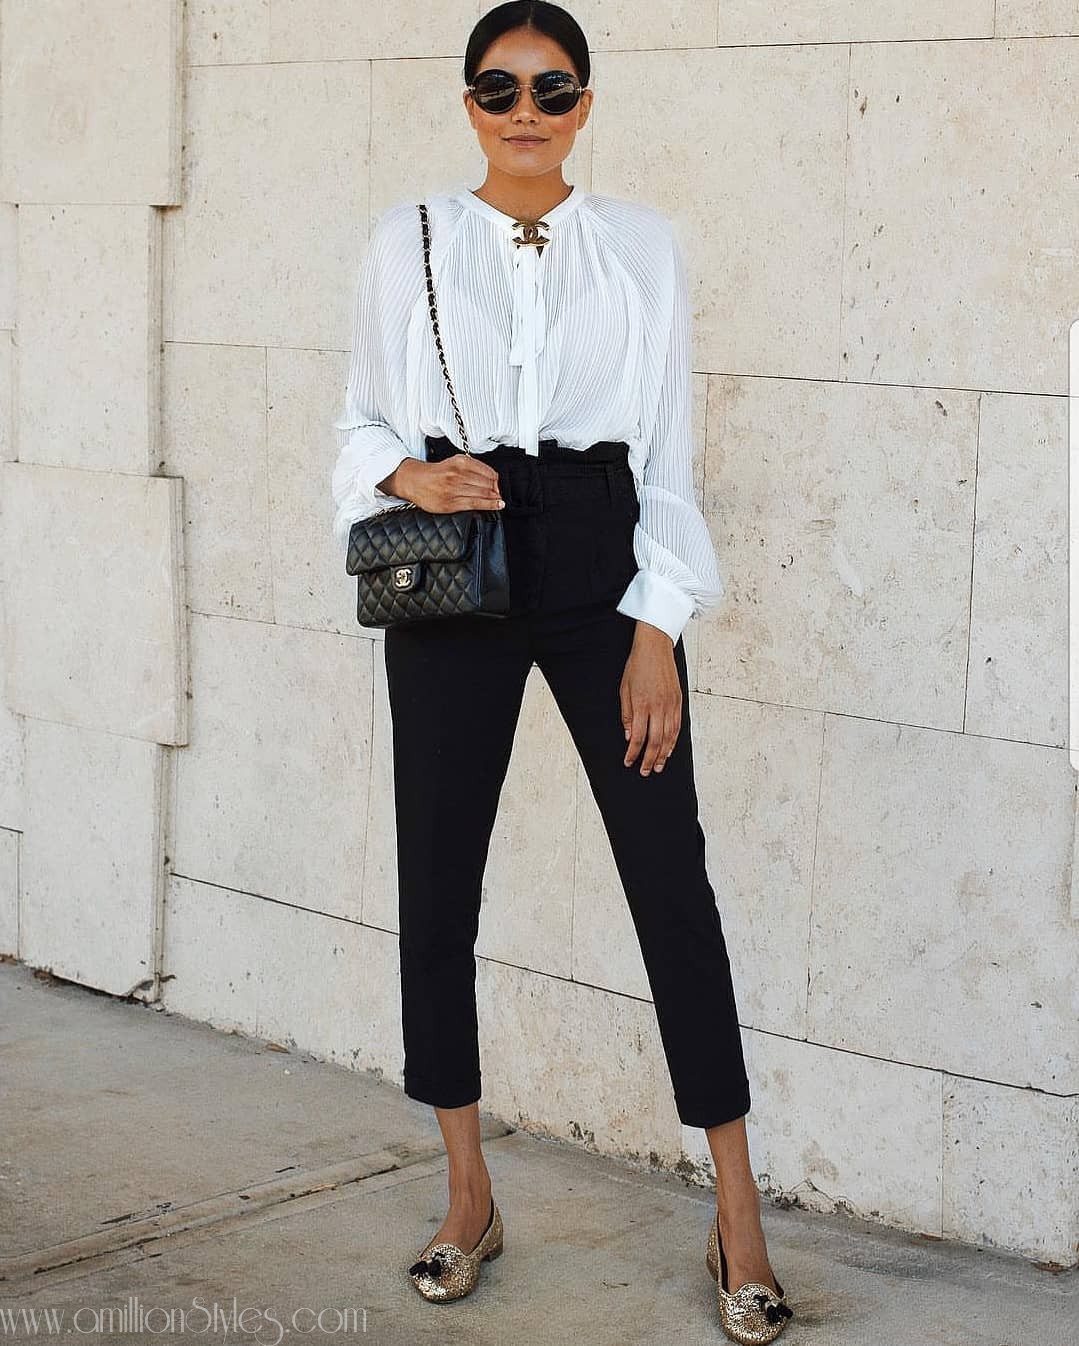 Learn How To Rock Monochrome With These 8 Monochrome Outfits